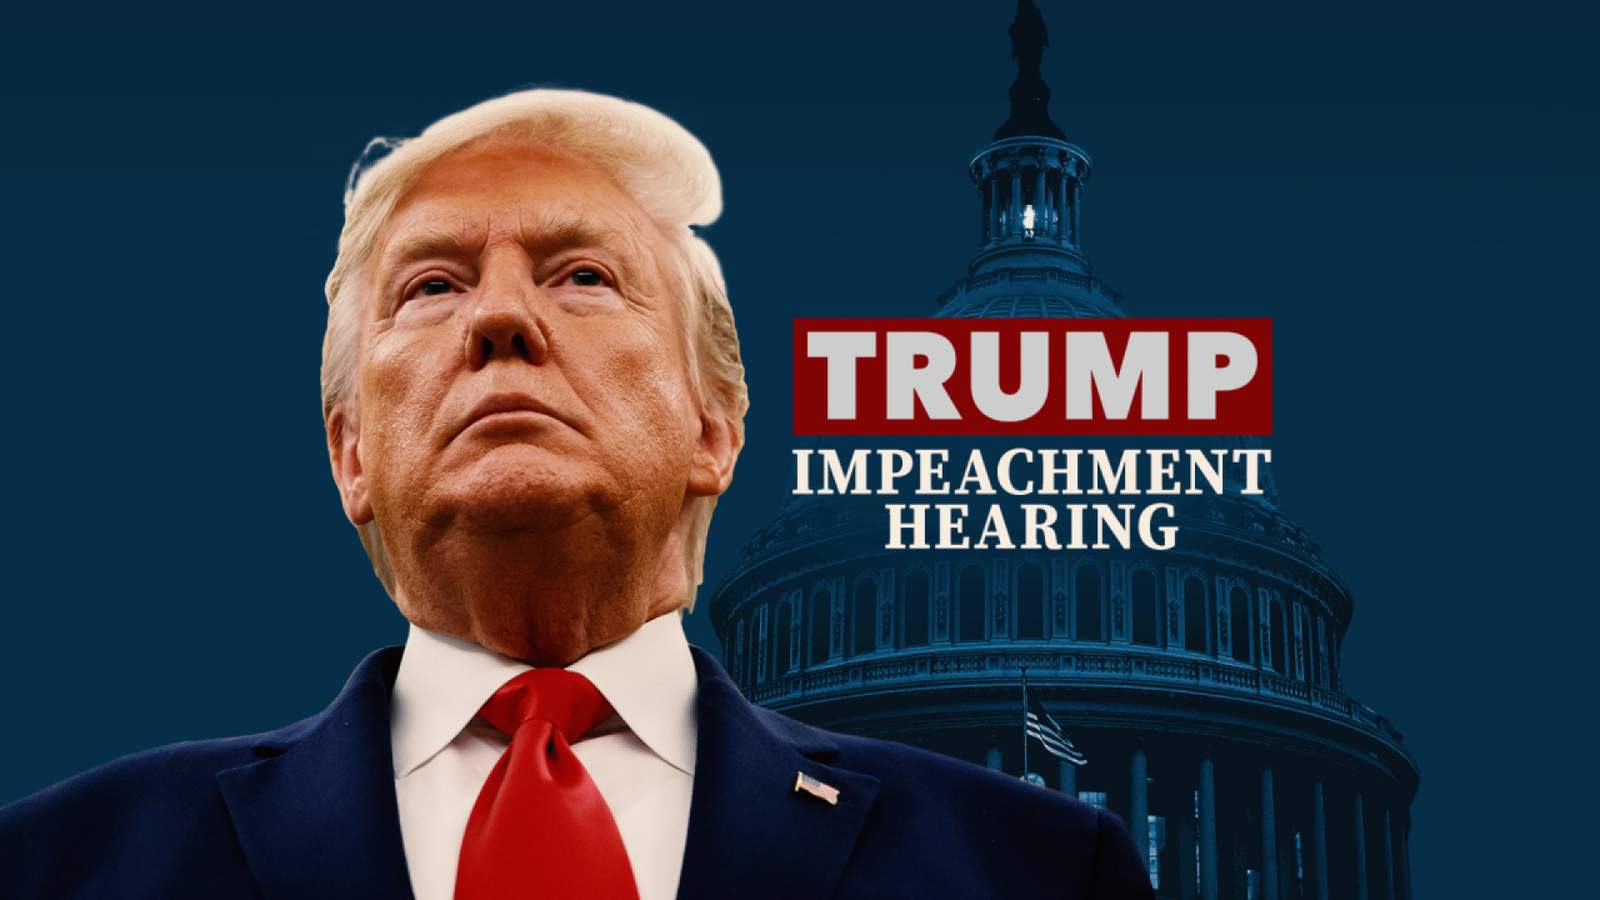 What you need to know ahead of the public presidential impeachment hearings